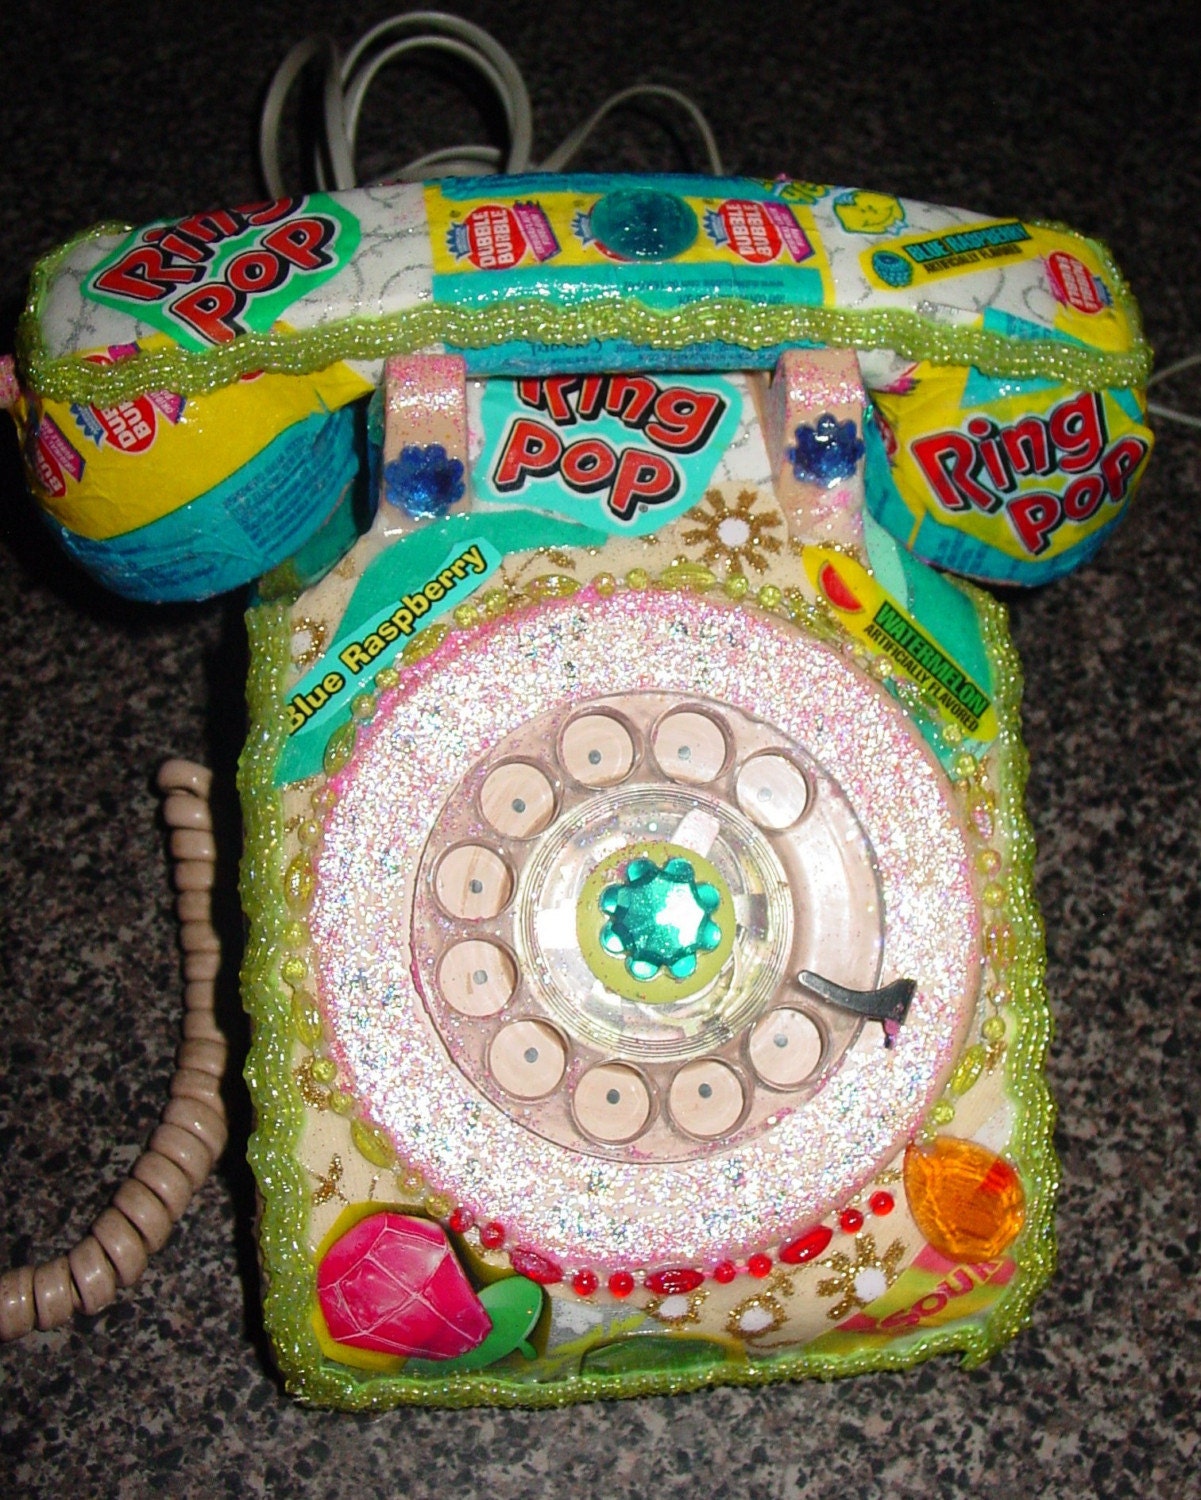 recycled vintage dial phone by C.Reinke RING POP candy wrappers.Kitsch at its best reserved for Emily